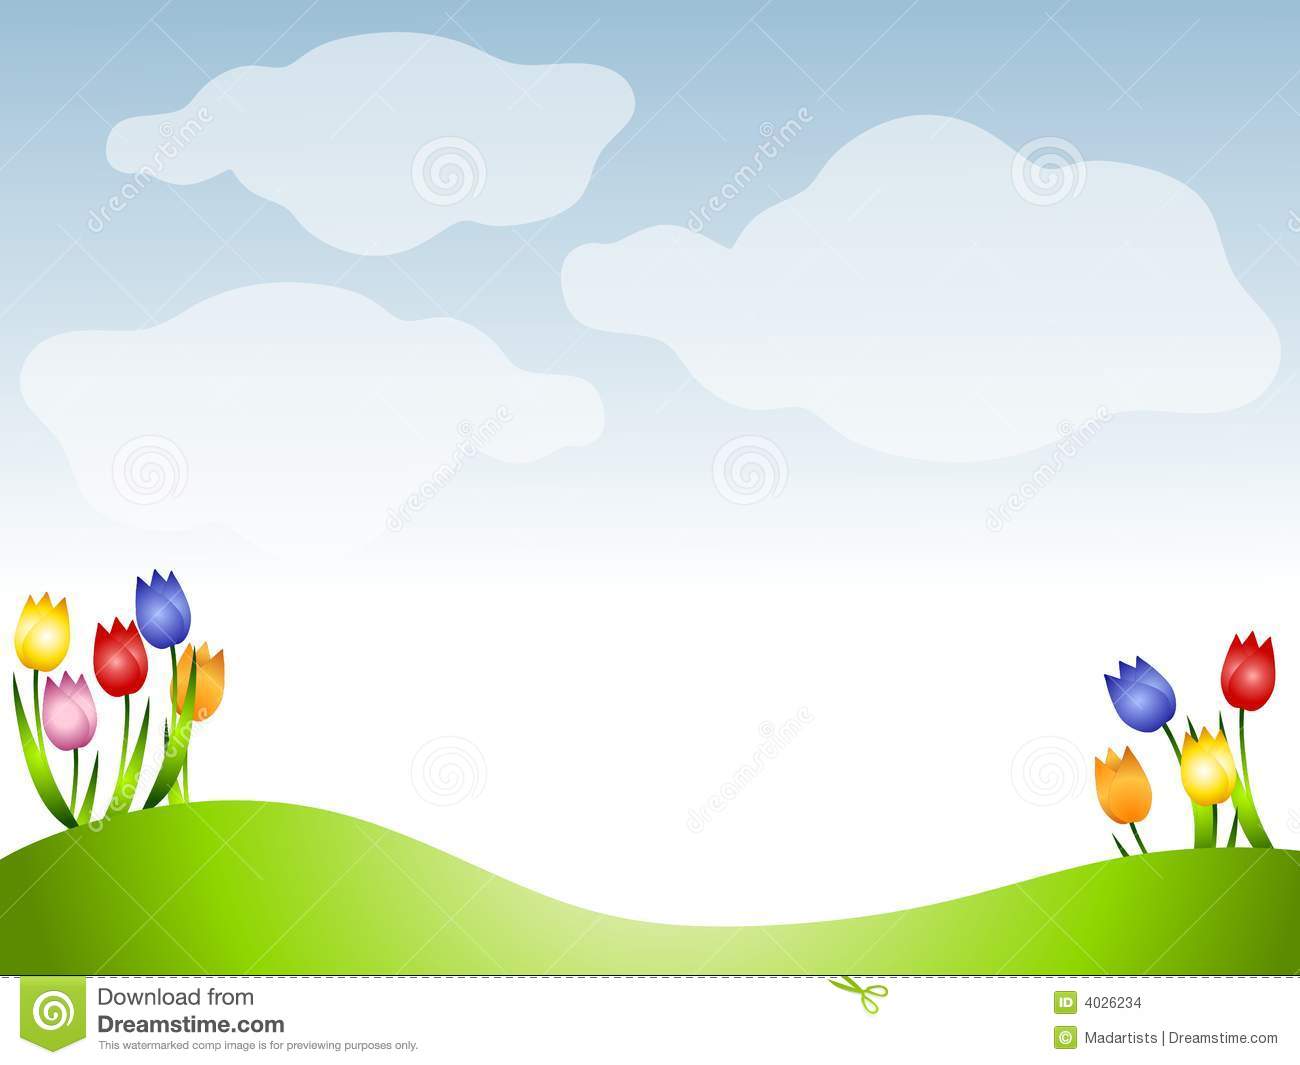 Spring background clipart - Clipground